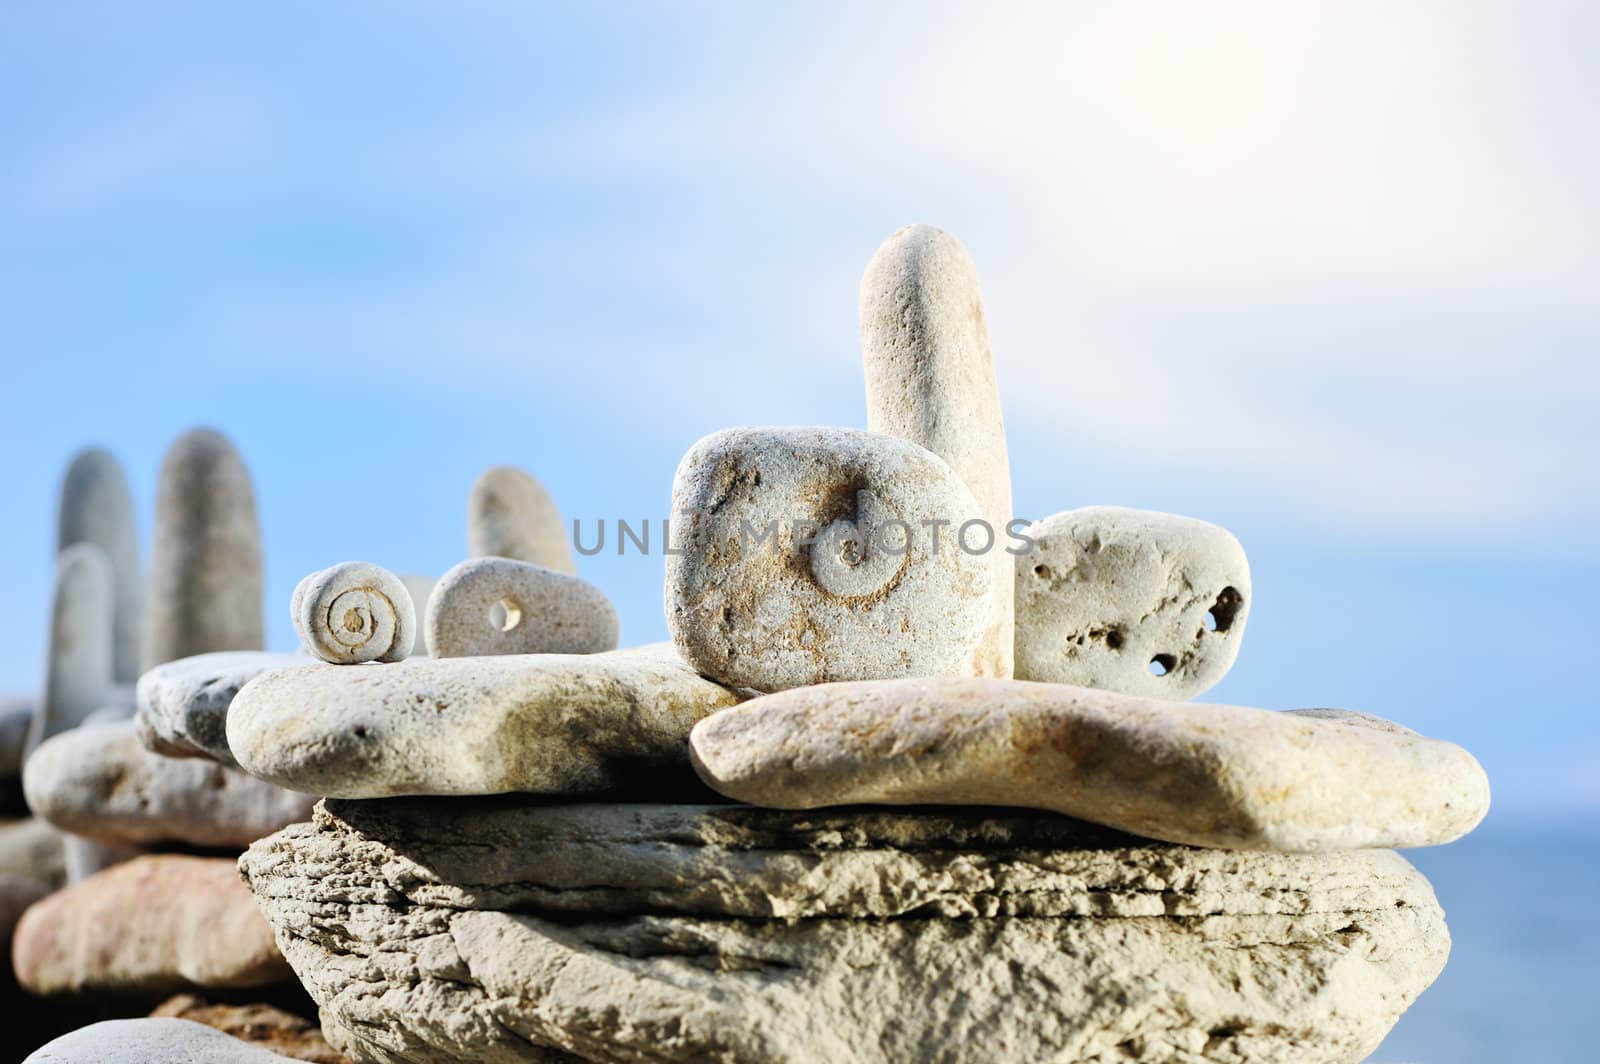 The structure of the spiral in some white stones